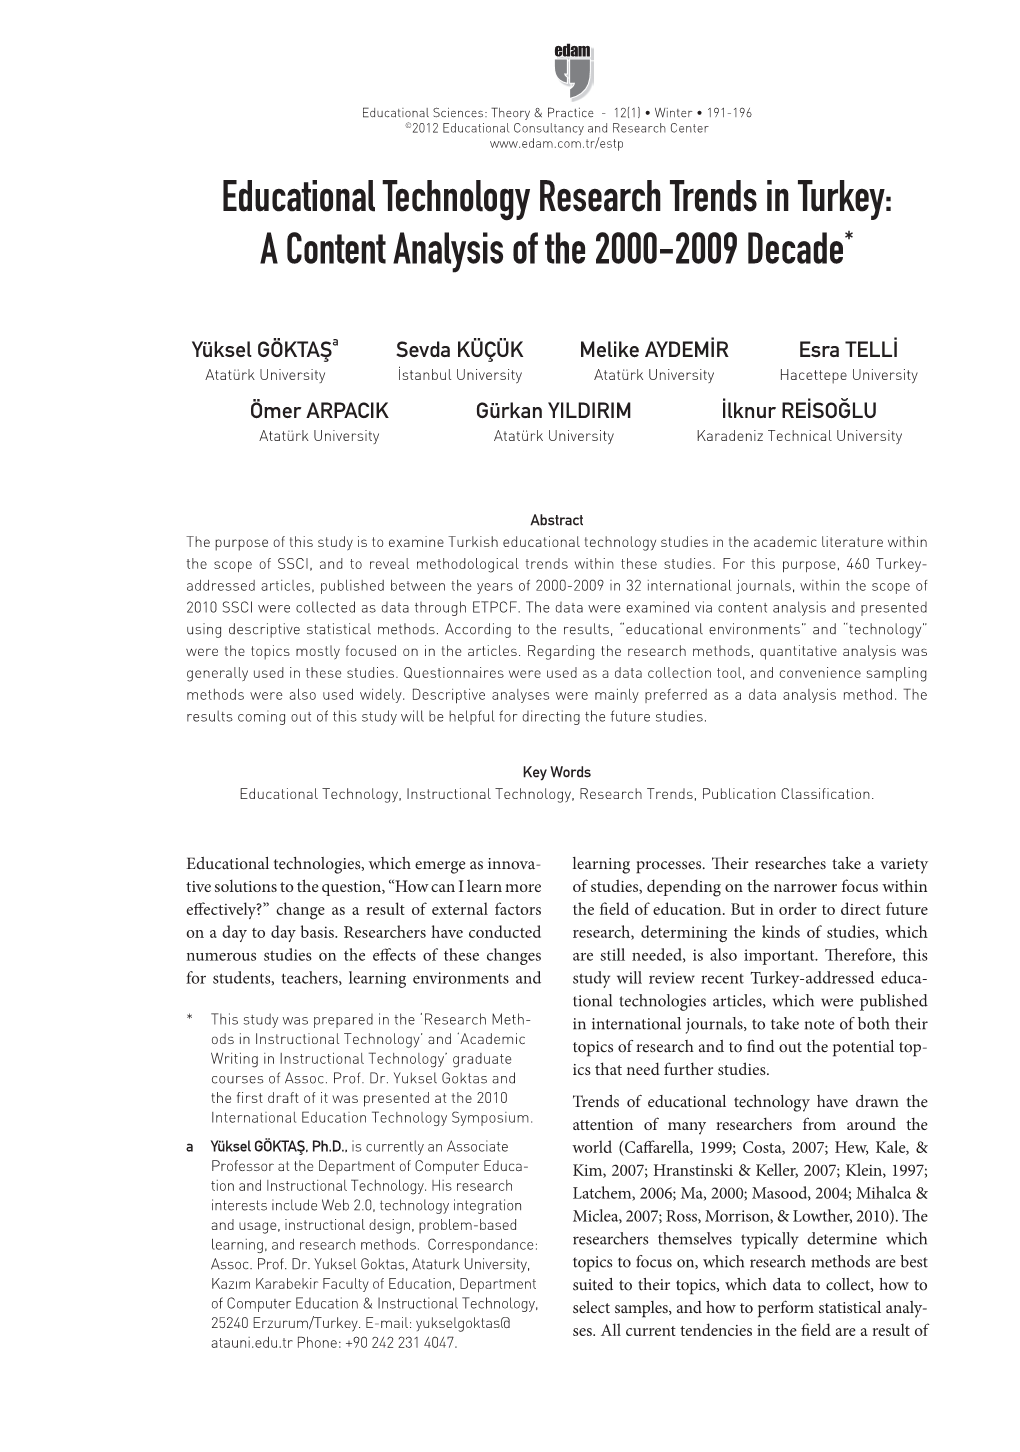 Educational Technology Research Trends in Turkey: a Content Analysis of the 2000-2009 Decade*